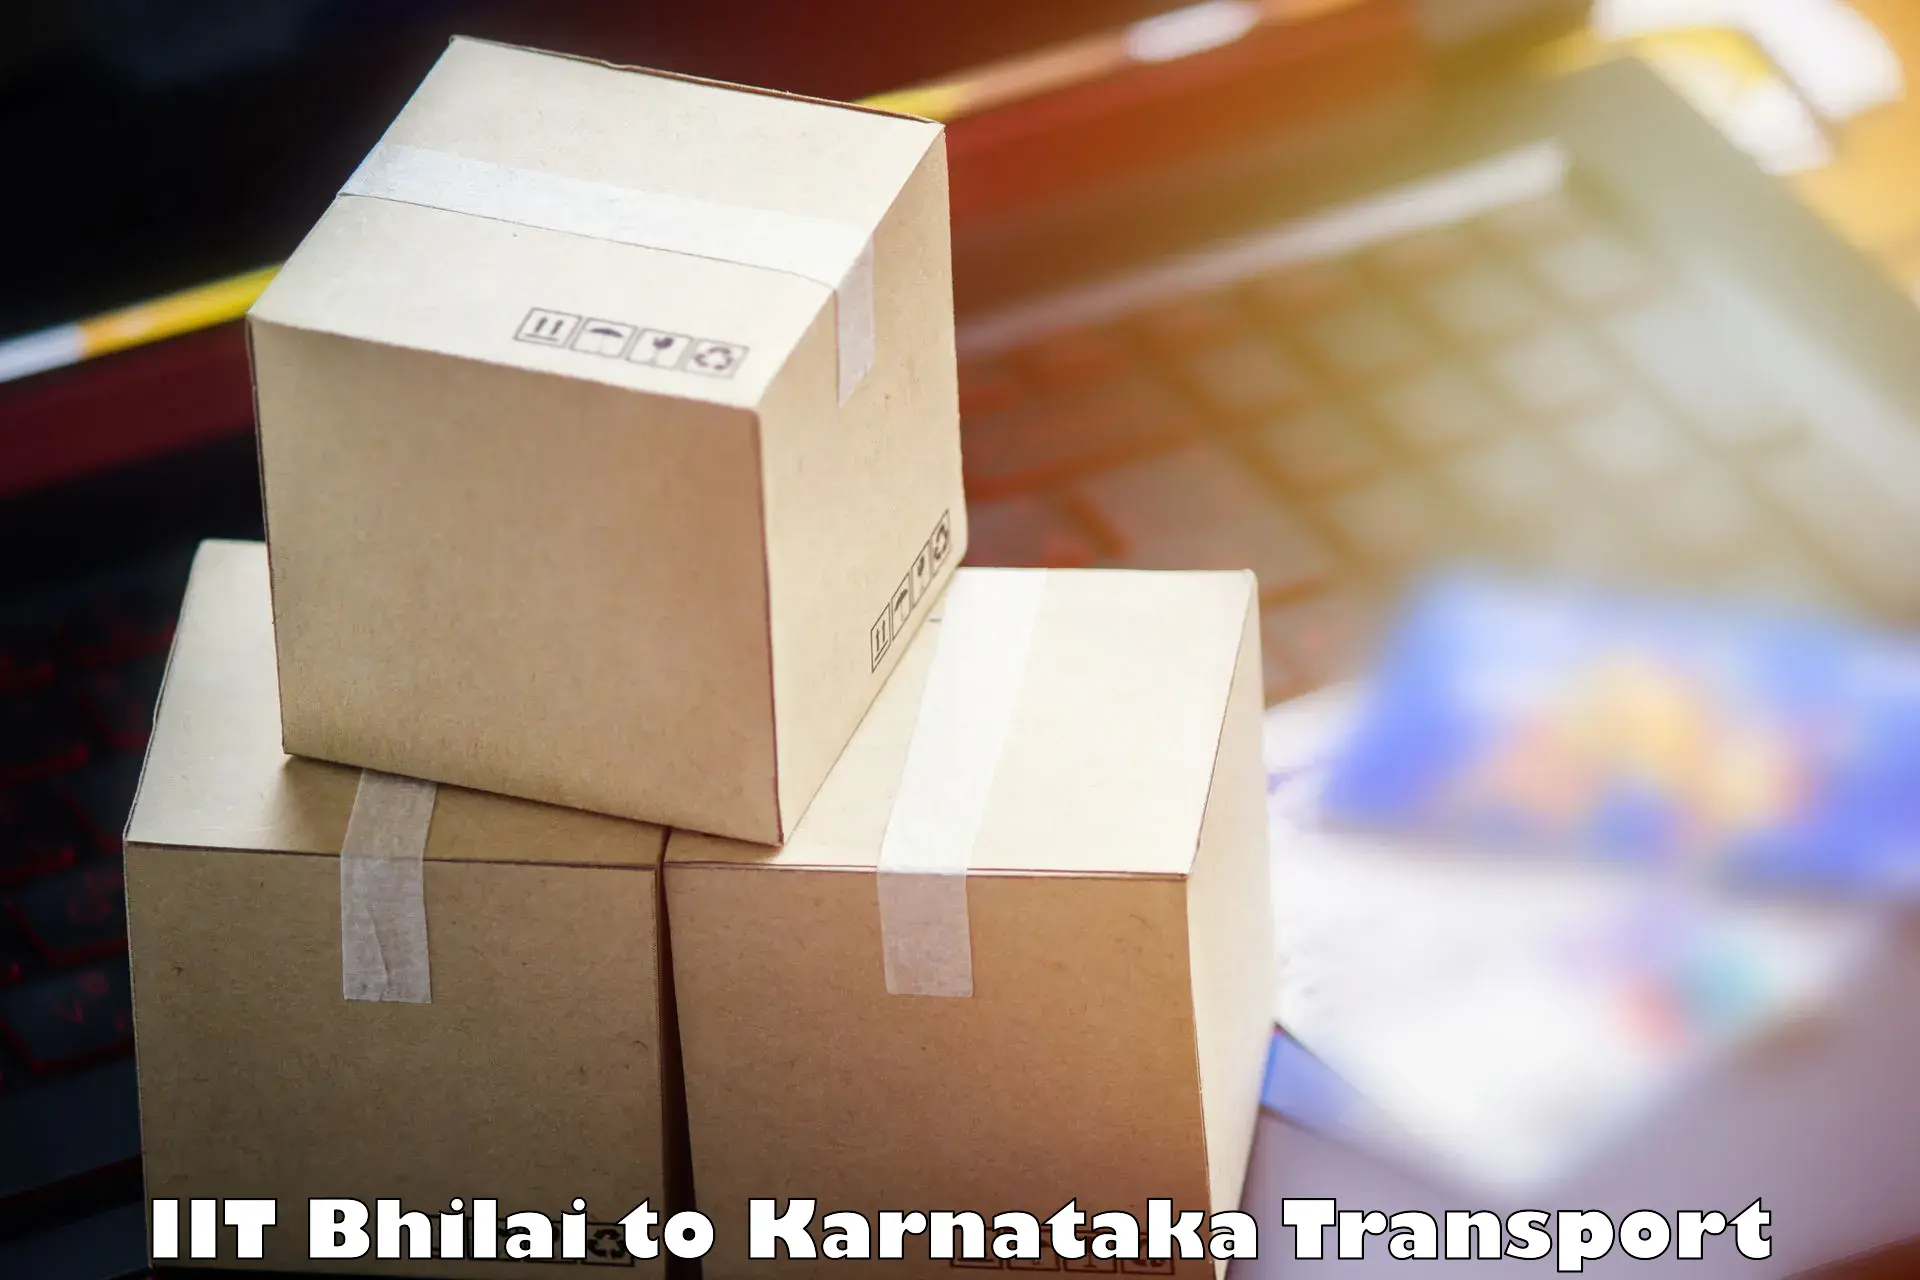 Cargo train transport services in IIT Bhilai to Kollegal